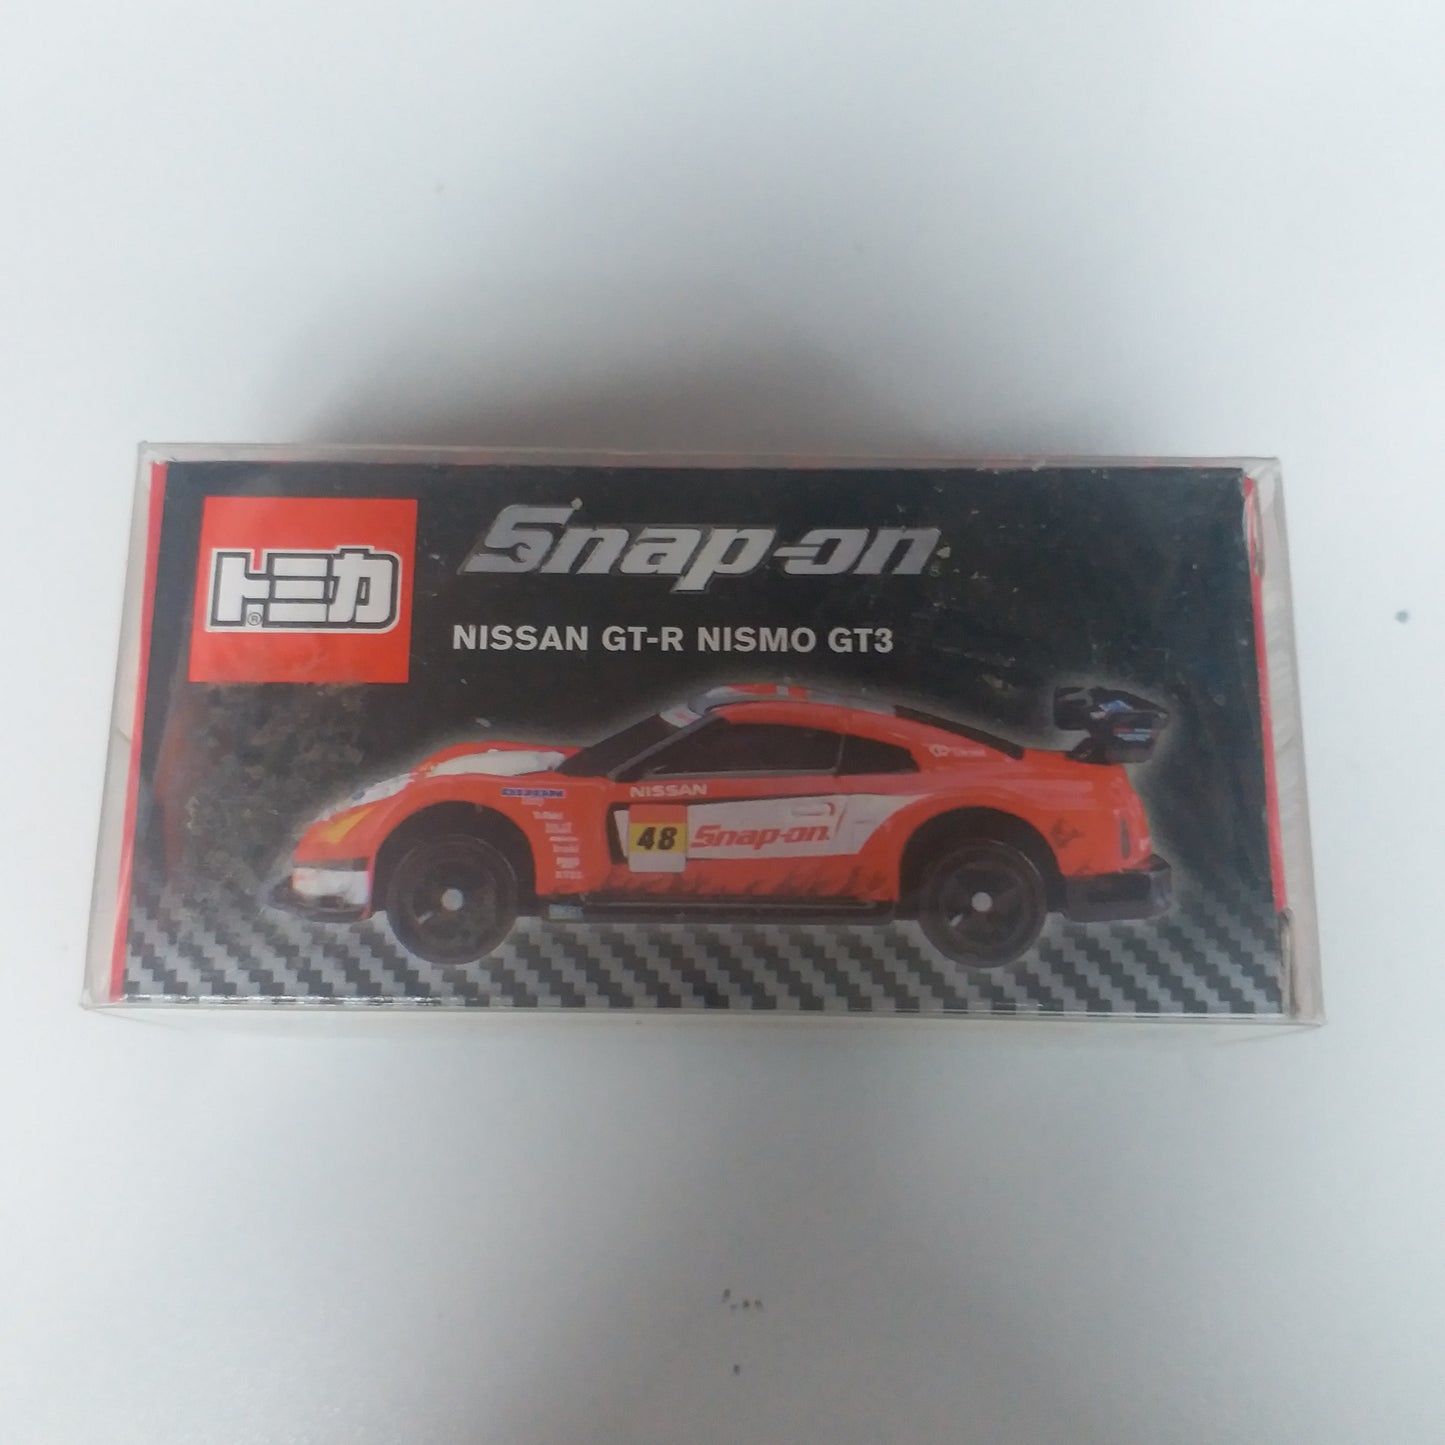 Tomica Exclusive Snap-On Nissan GT-R Nismo GT3 1:64 scale